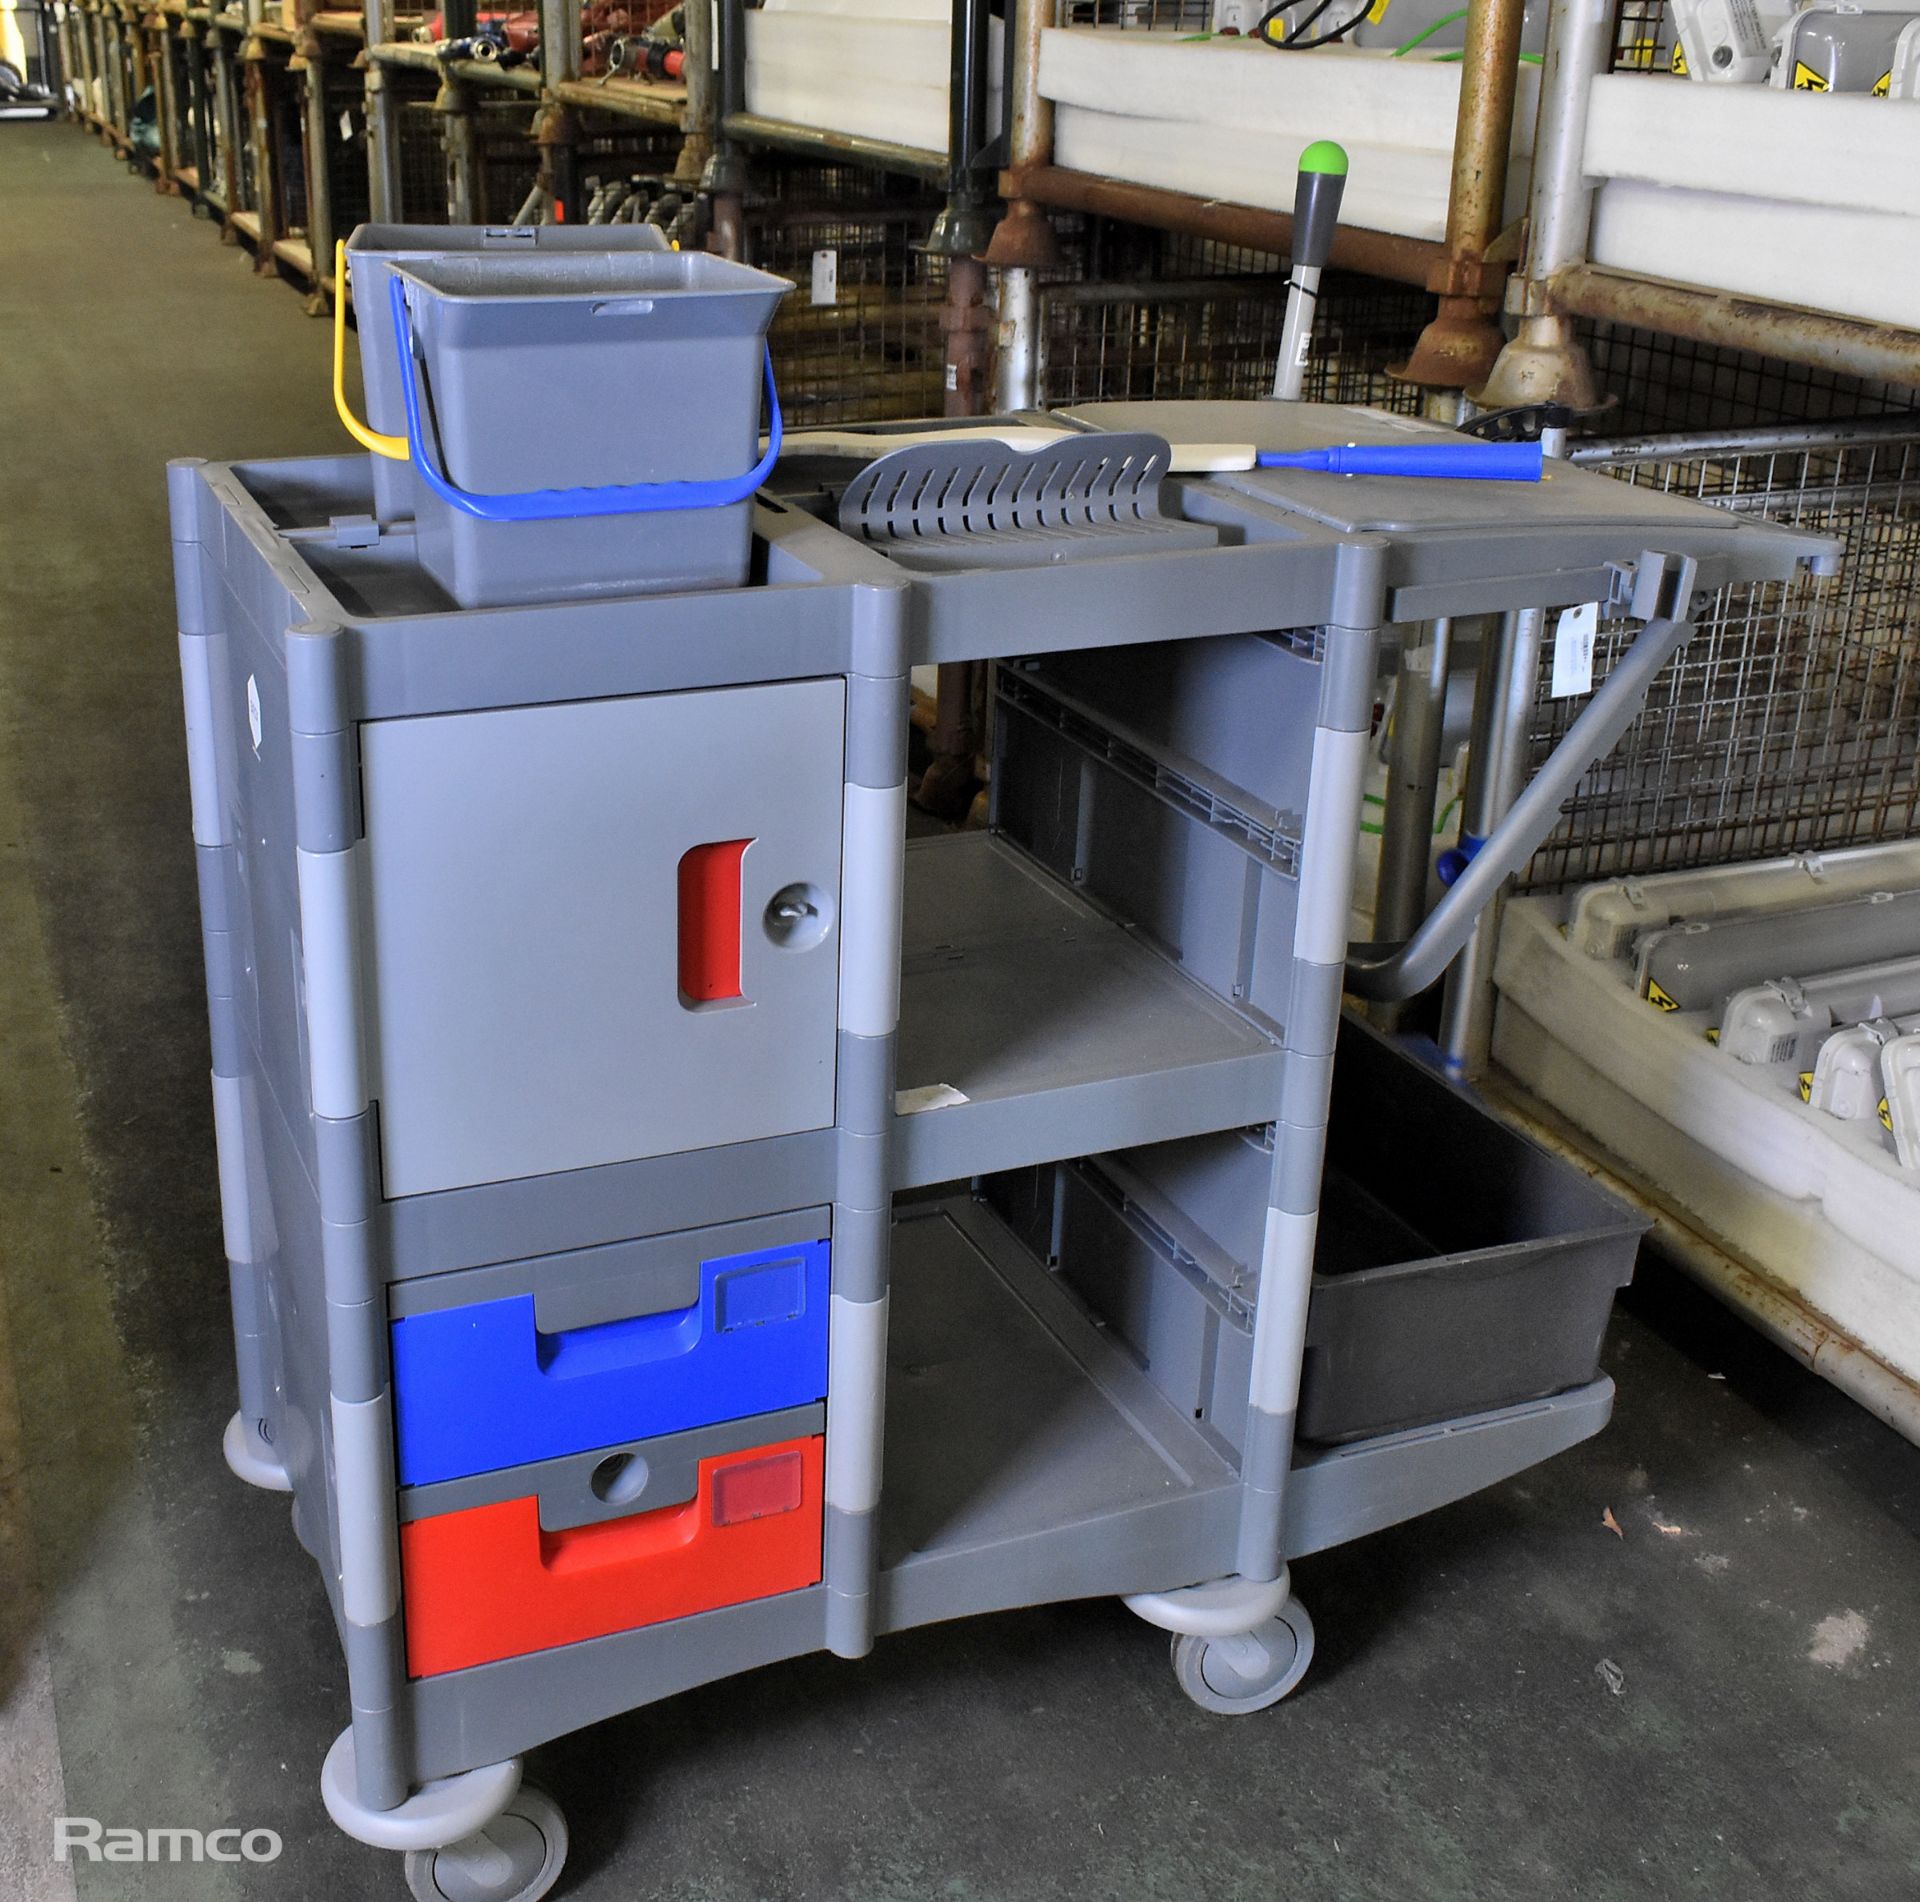 Brix janitorial trolley with cleaning accessories - L 1200 x W 600 x H 1050mm - Image 5 of 5